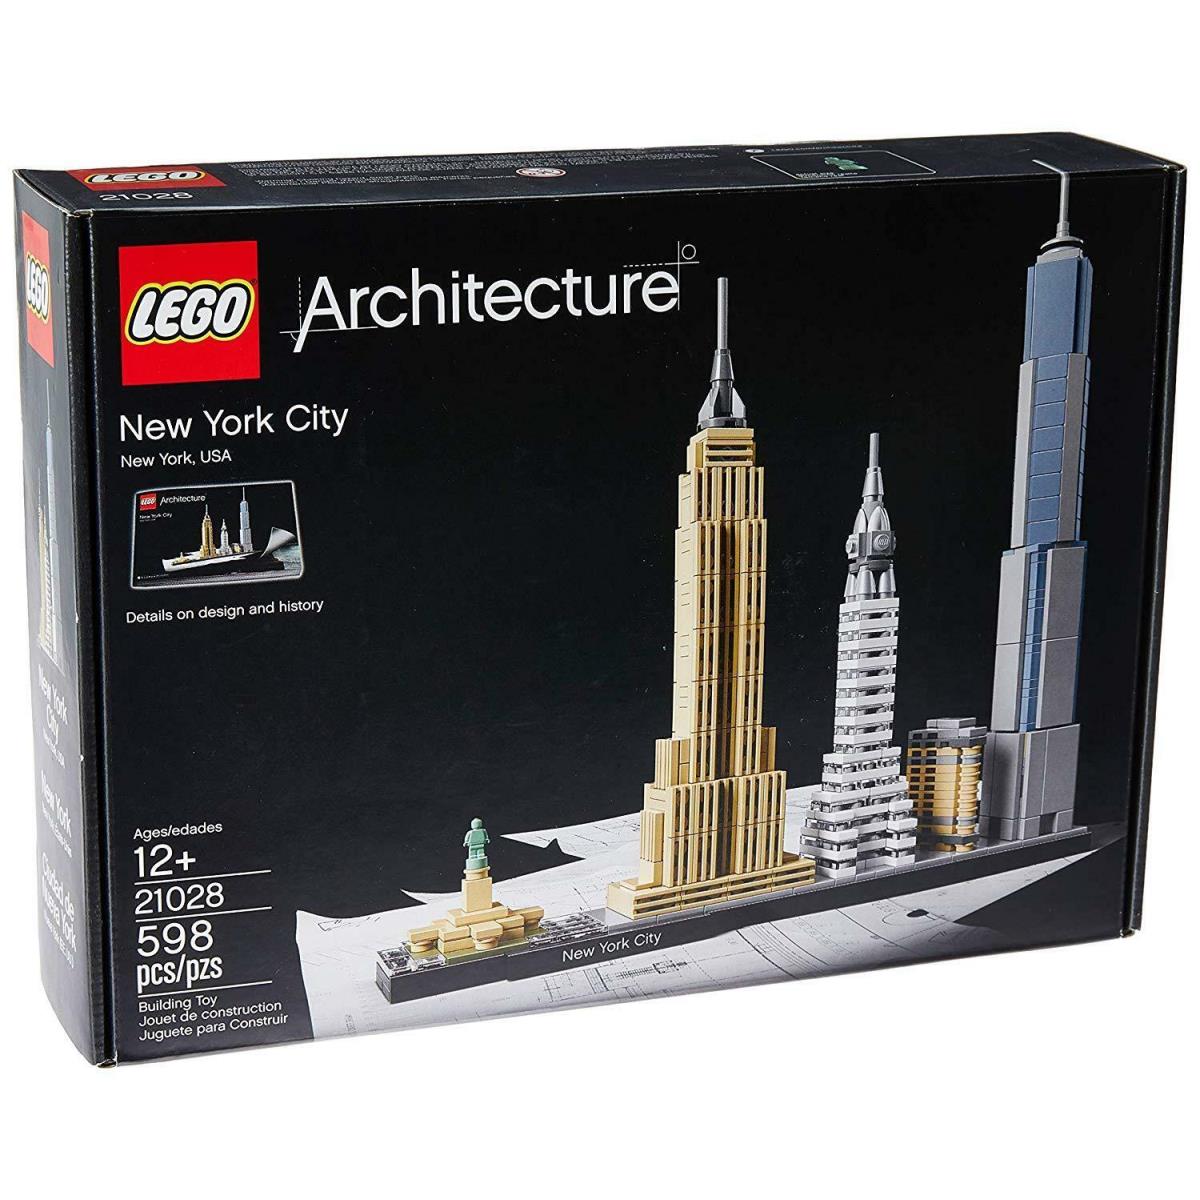 Lego Architecture York City 21028 2 Day Shipping Available